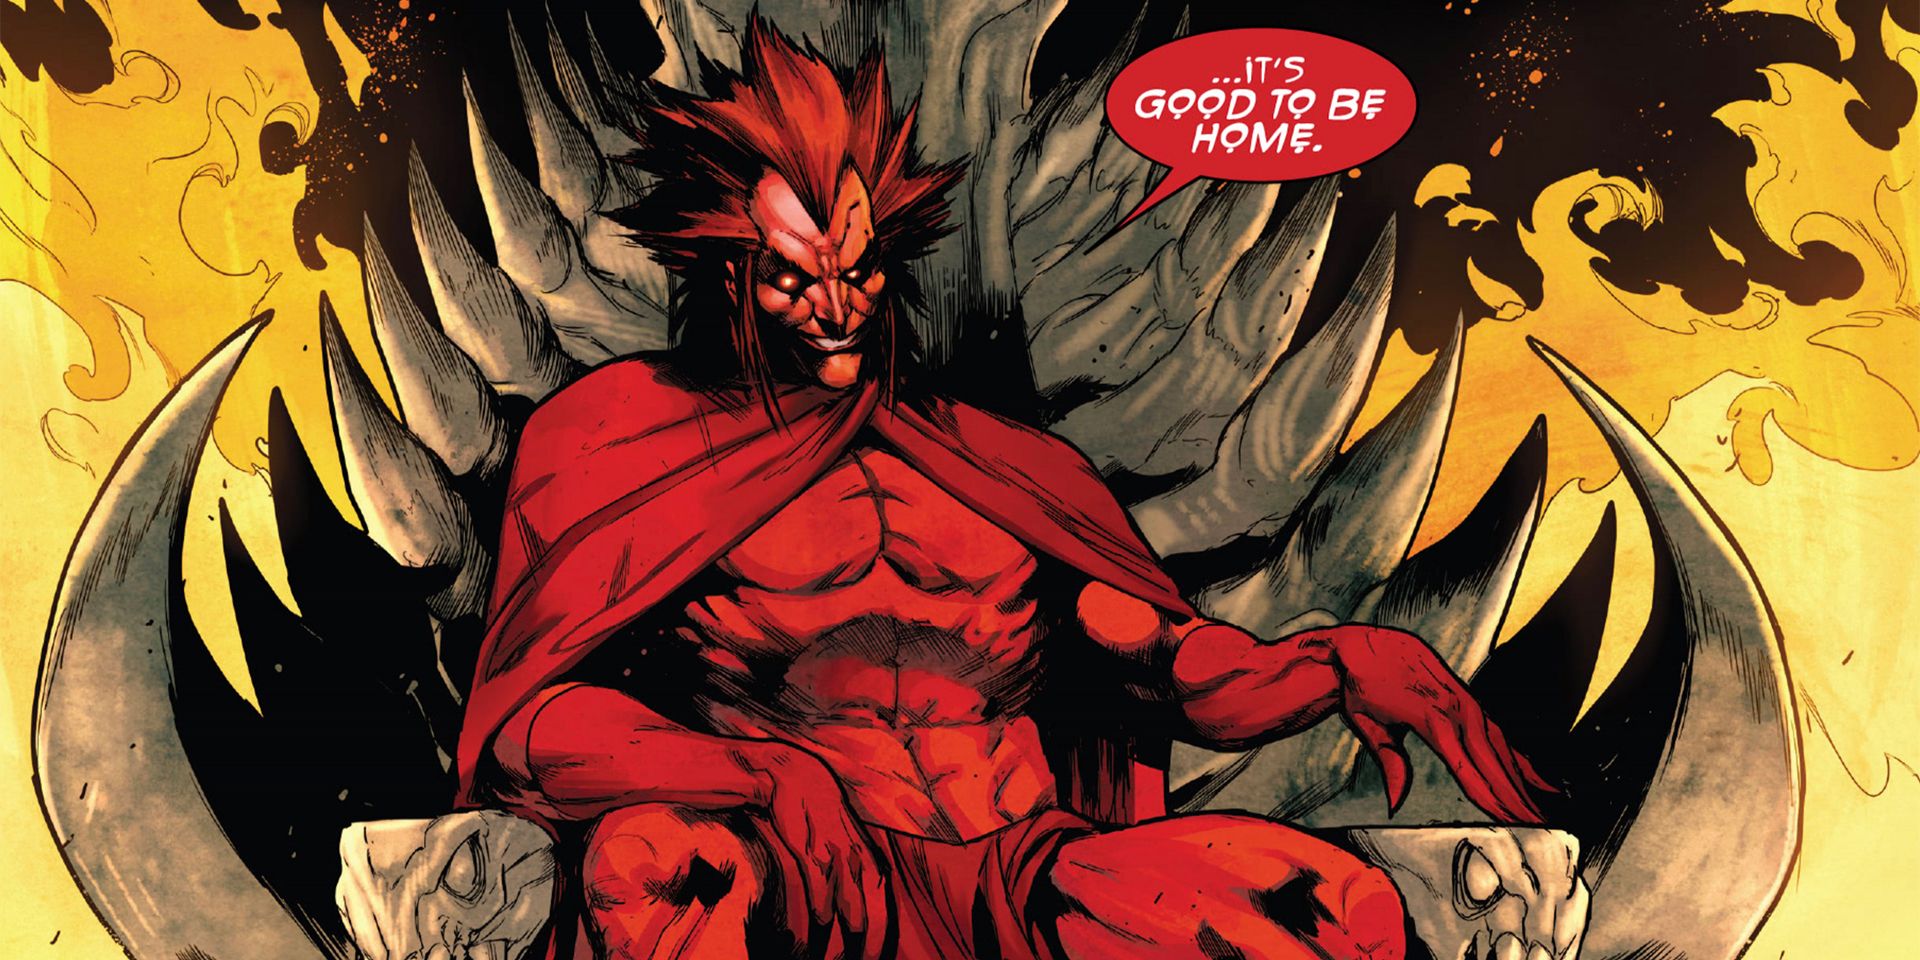 Mephisto sitting in a chair in the comics